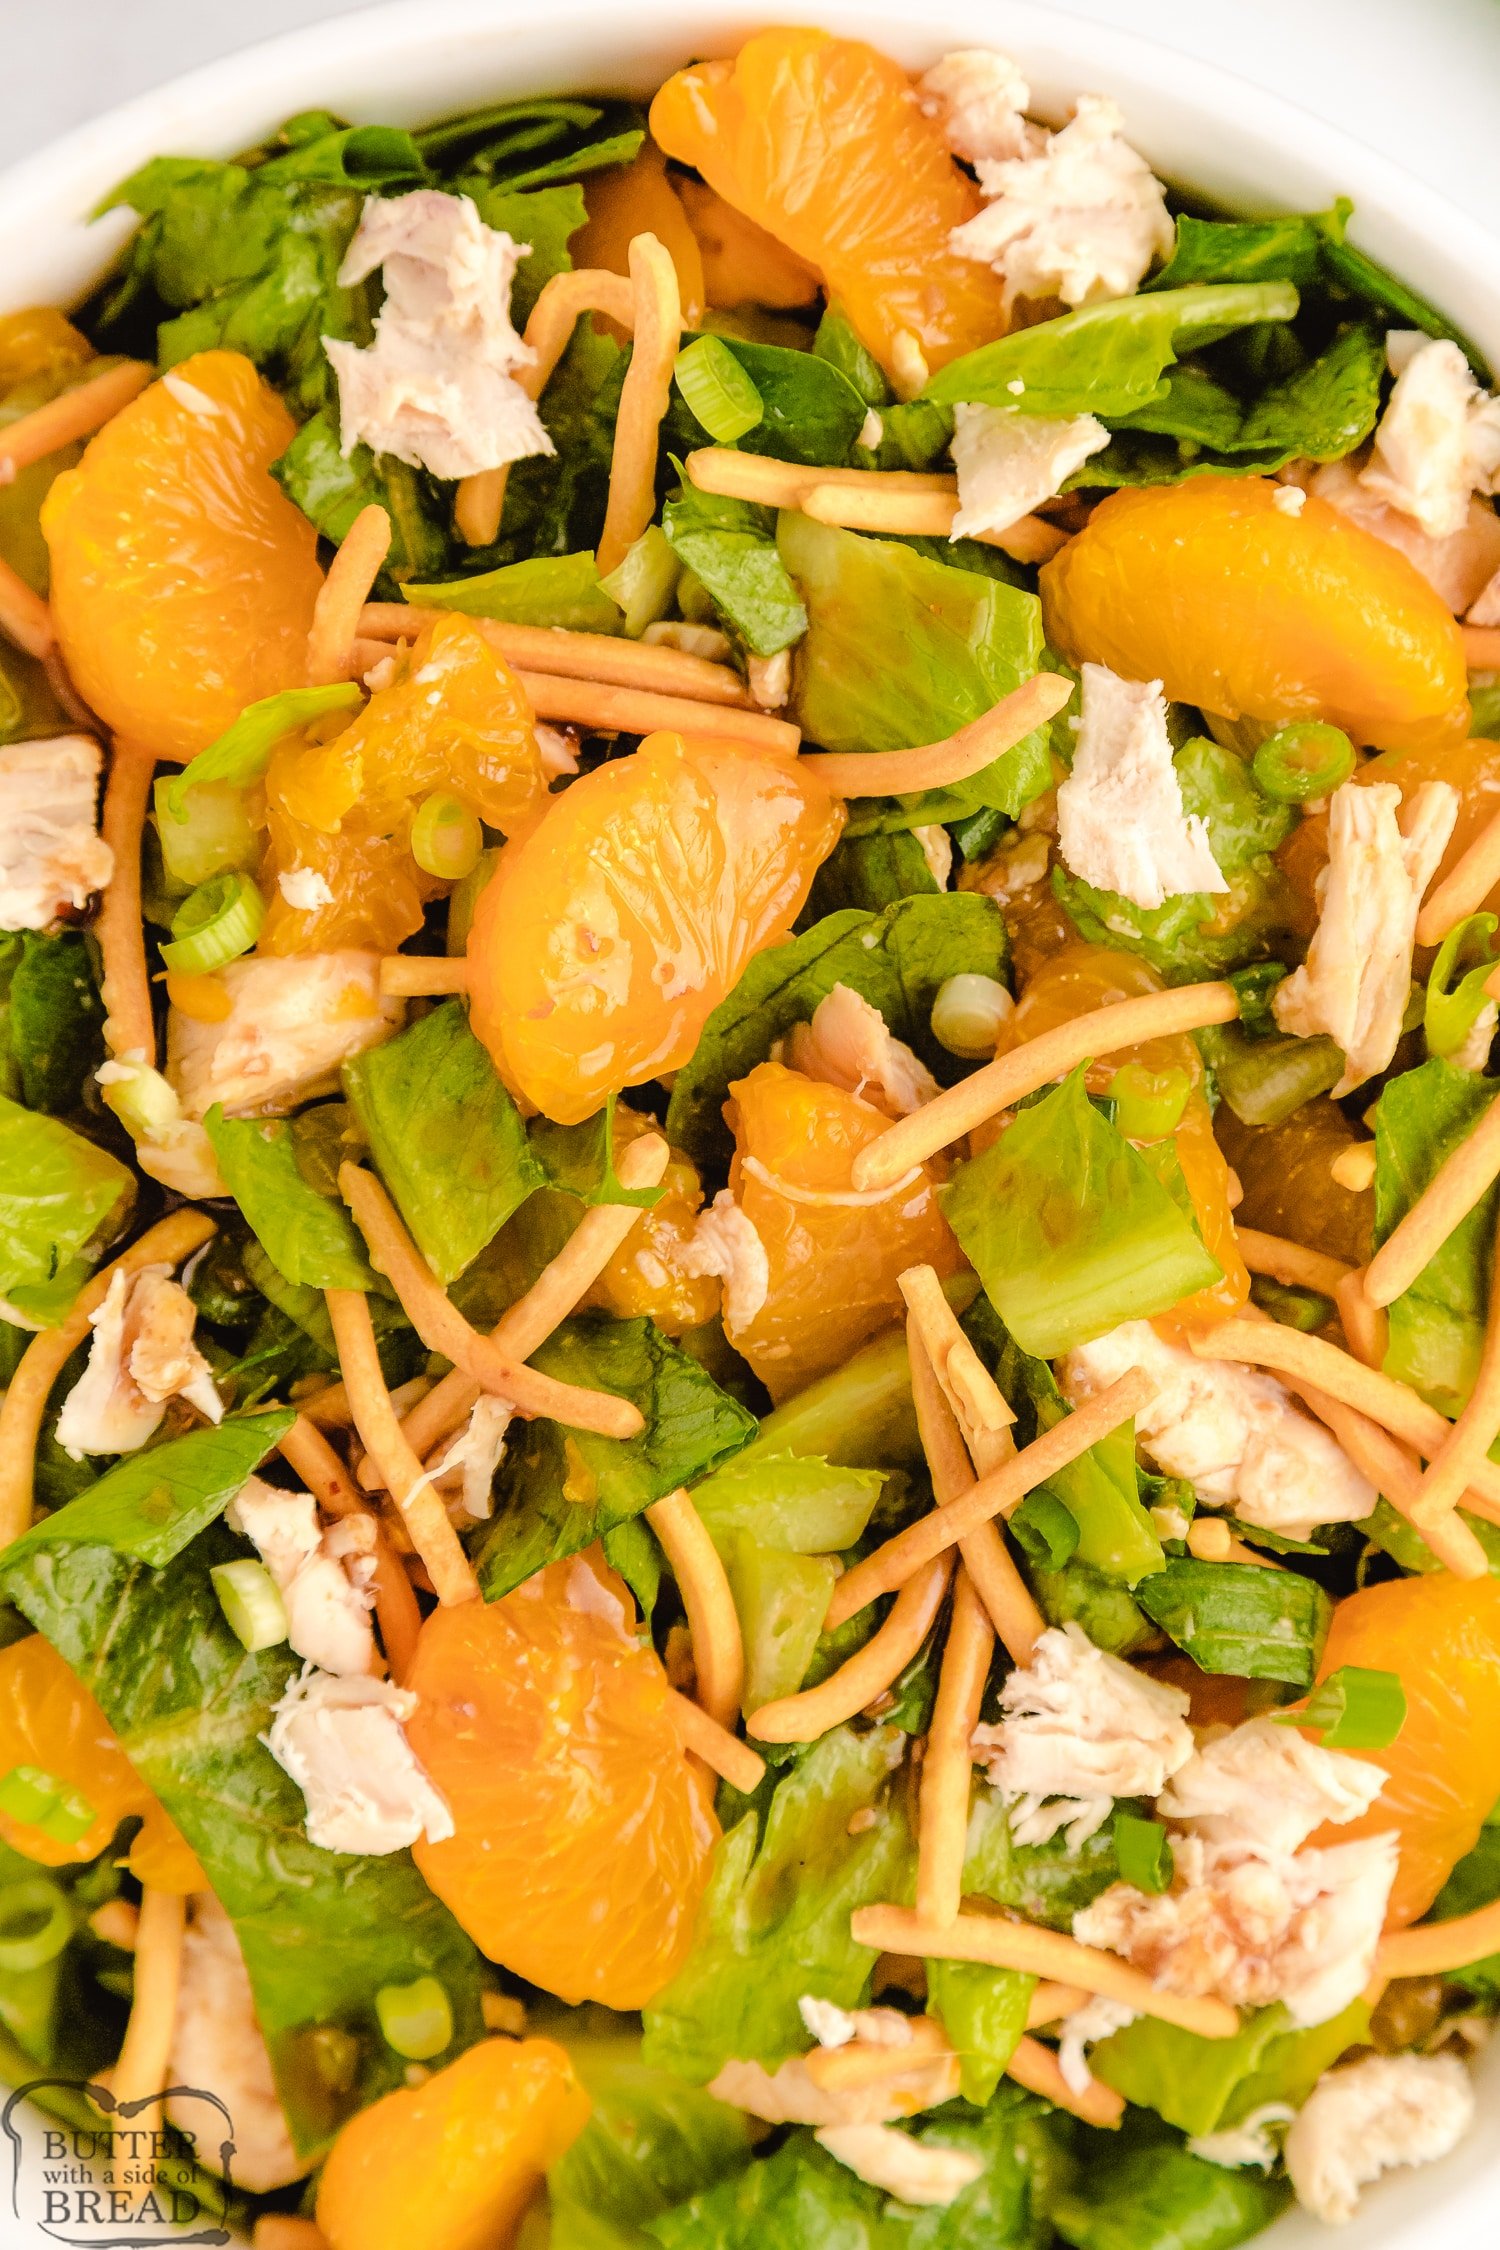 Chinese chicken salad with mandarin oranges and chow mein noodles